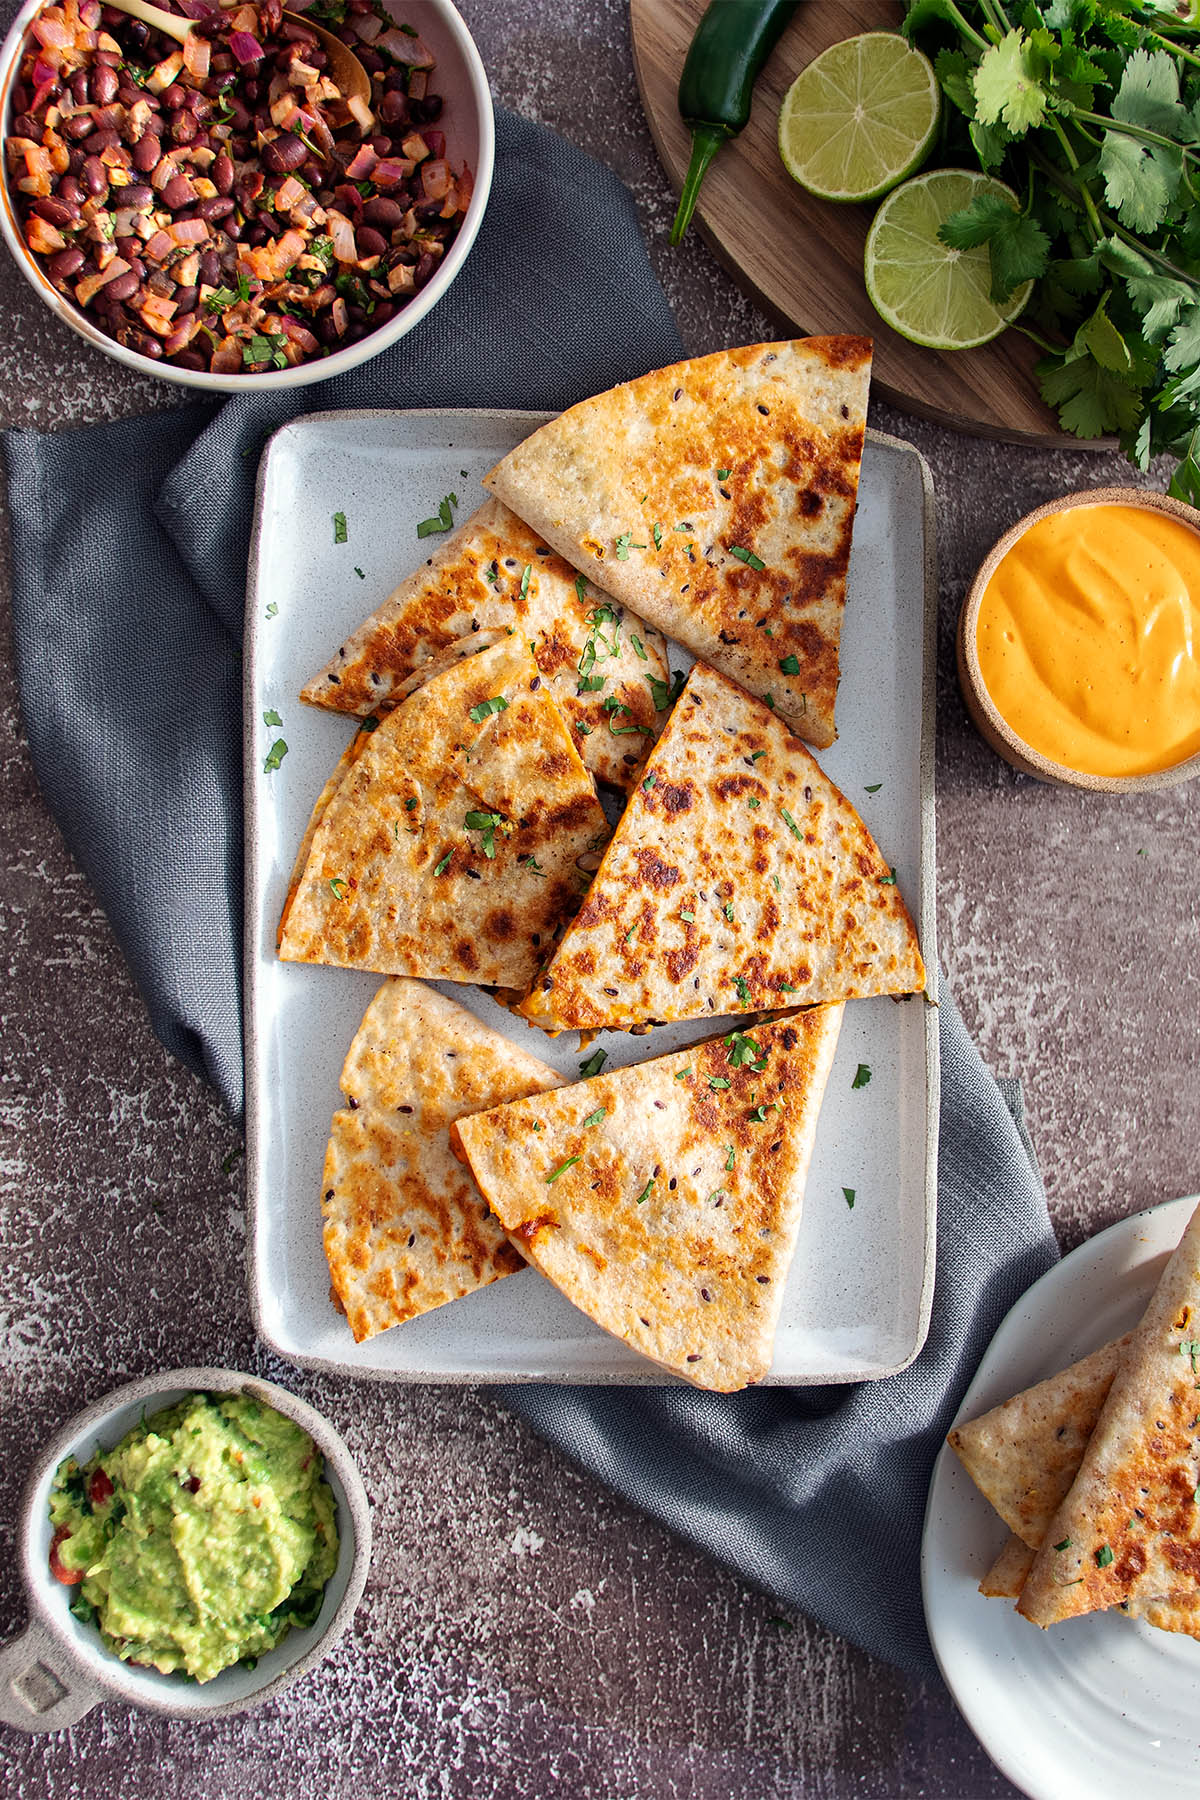 A plate with quesadillas surrounded by various condiments as featured in The Ultimate Plant-Based Cookbook by Sarah Cobacho